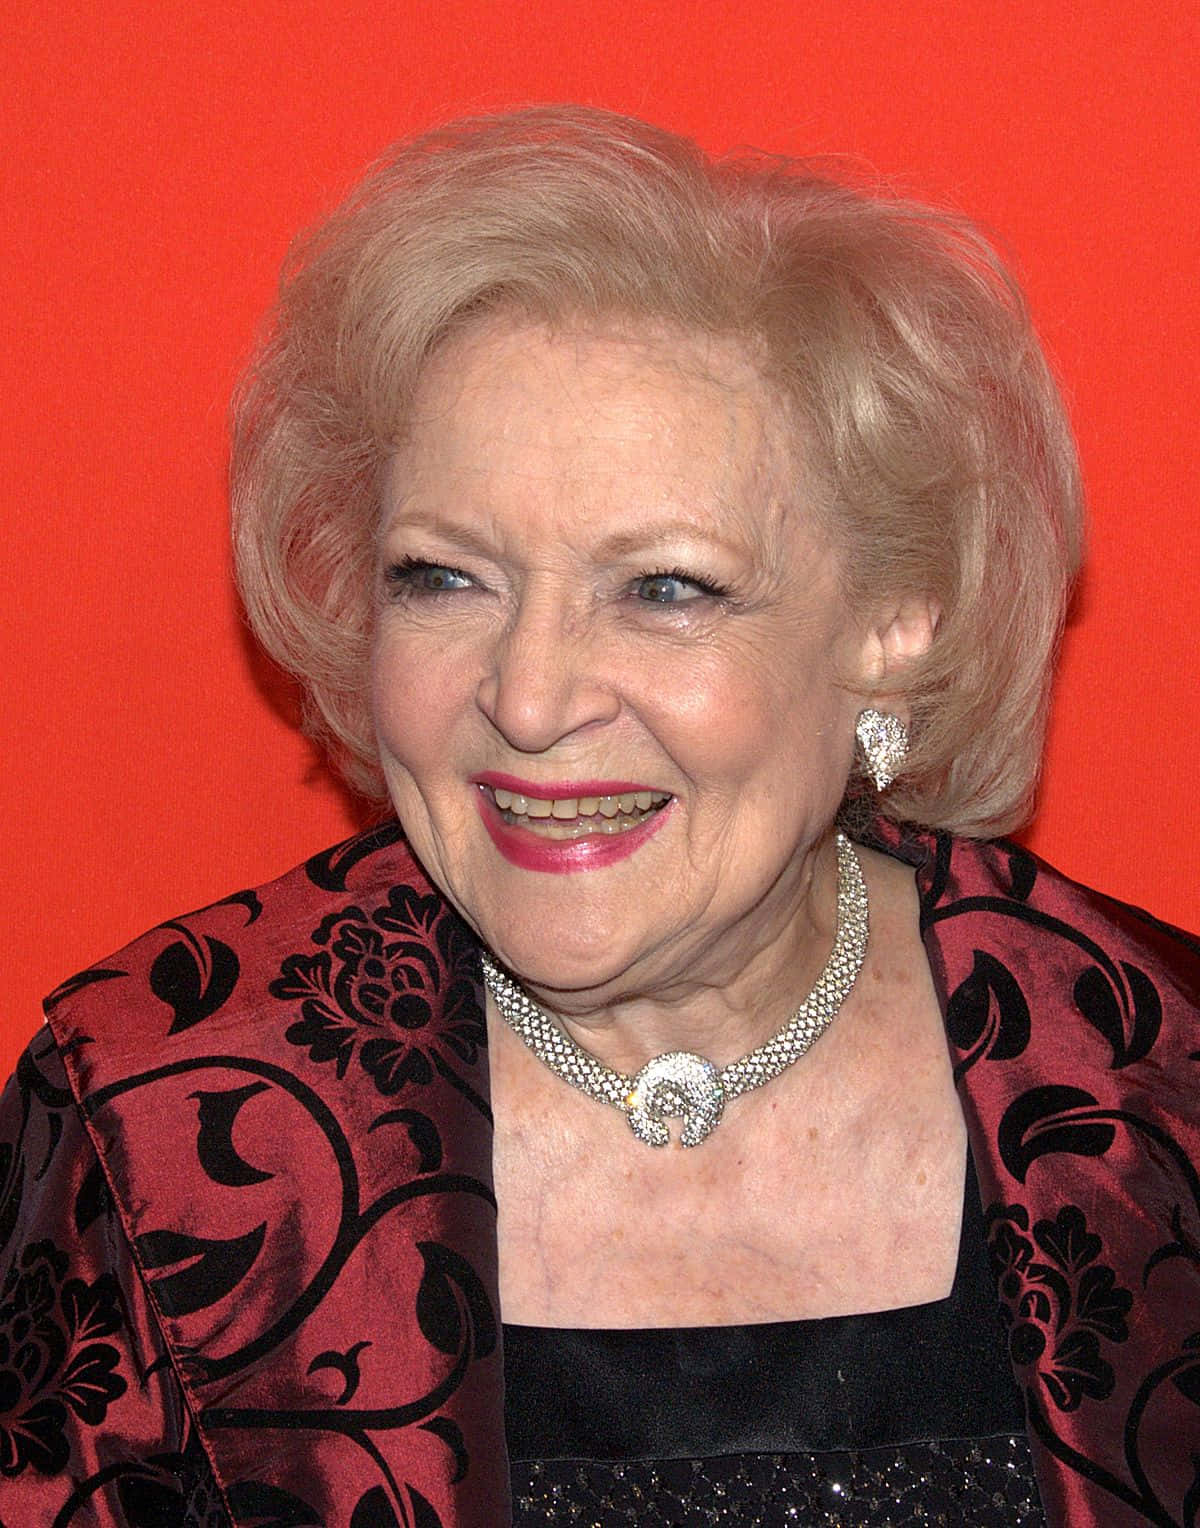 Legendary actress, comedian and animal rights proponent, Betty White!